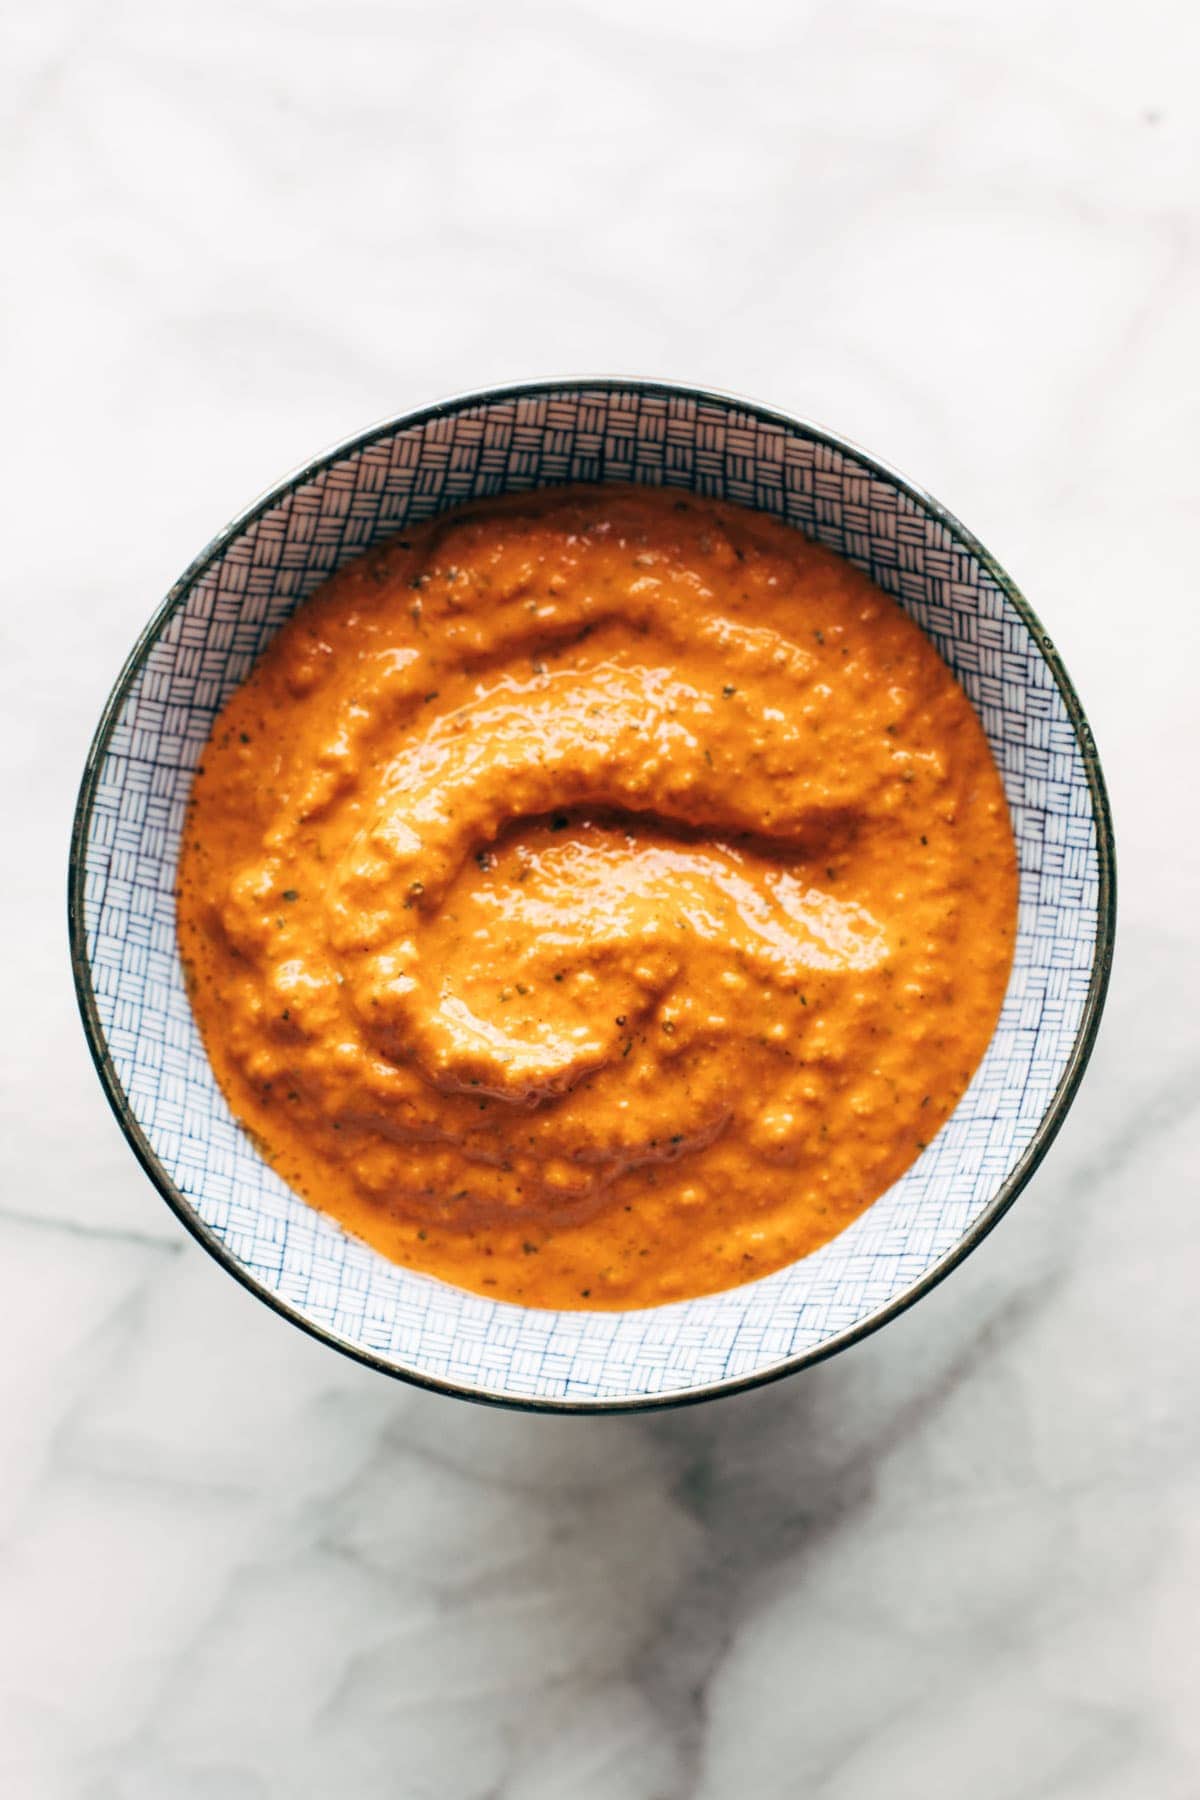 Roasted red pepper sauce in a bowl on a white background